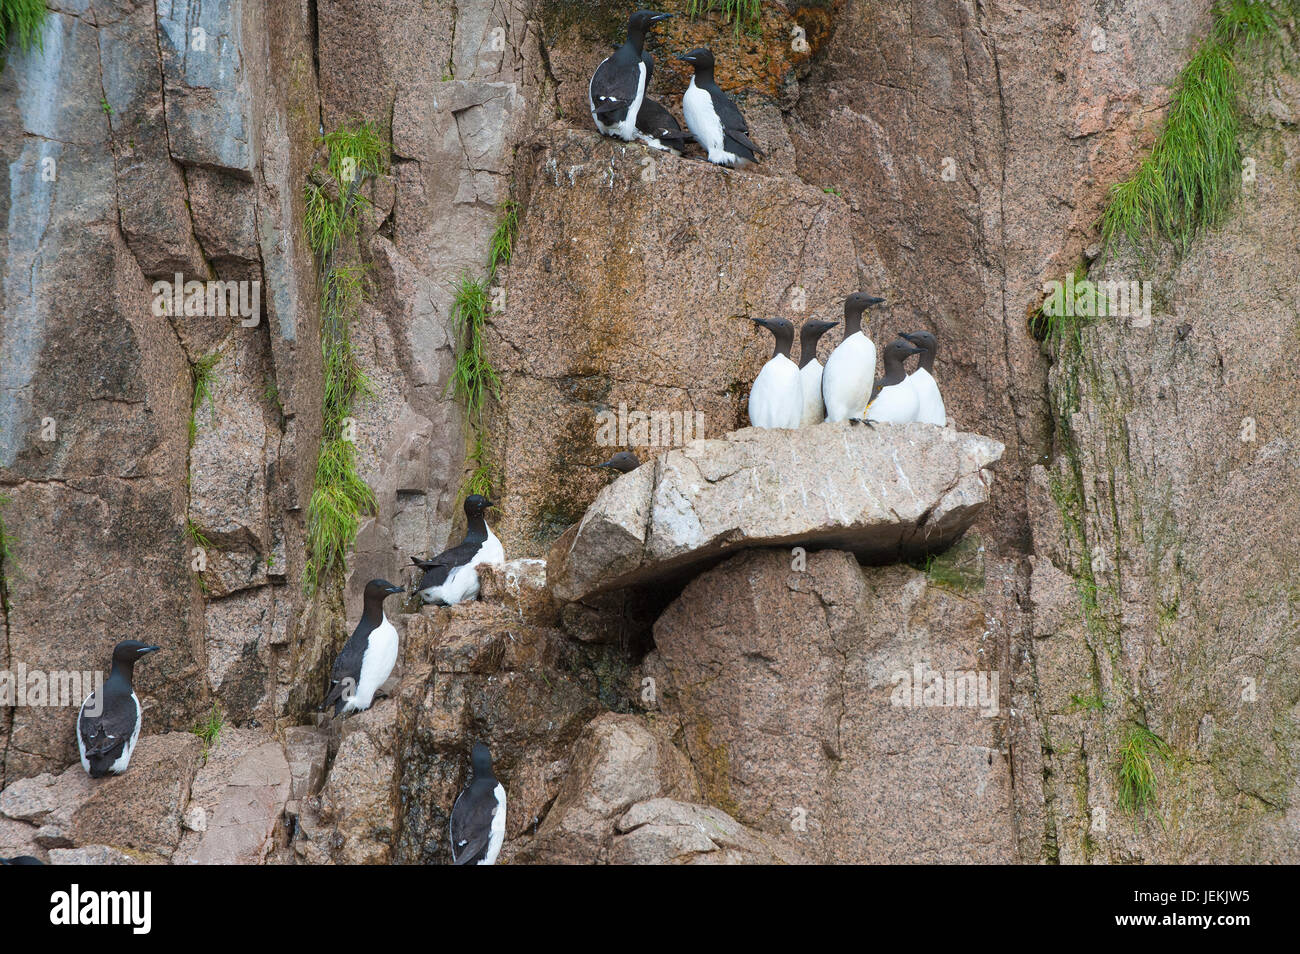 Brunnich's Guillemots (Uria lomvia) or Thick-billed Murres on the cliffs of Cape Achen, Chukotka, Russia Stock Photo